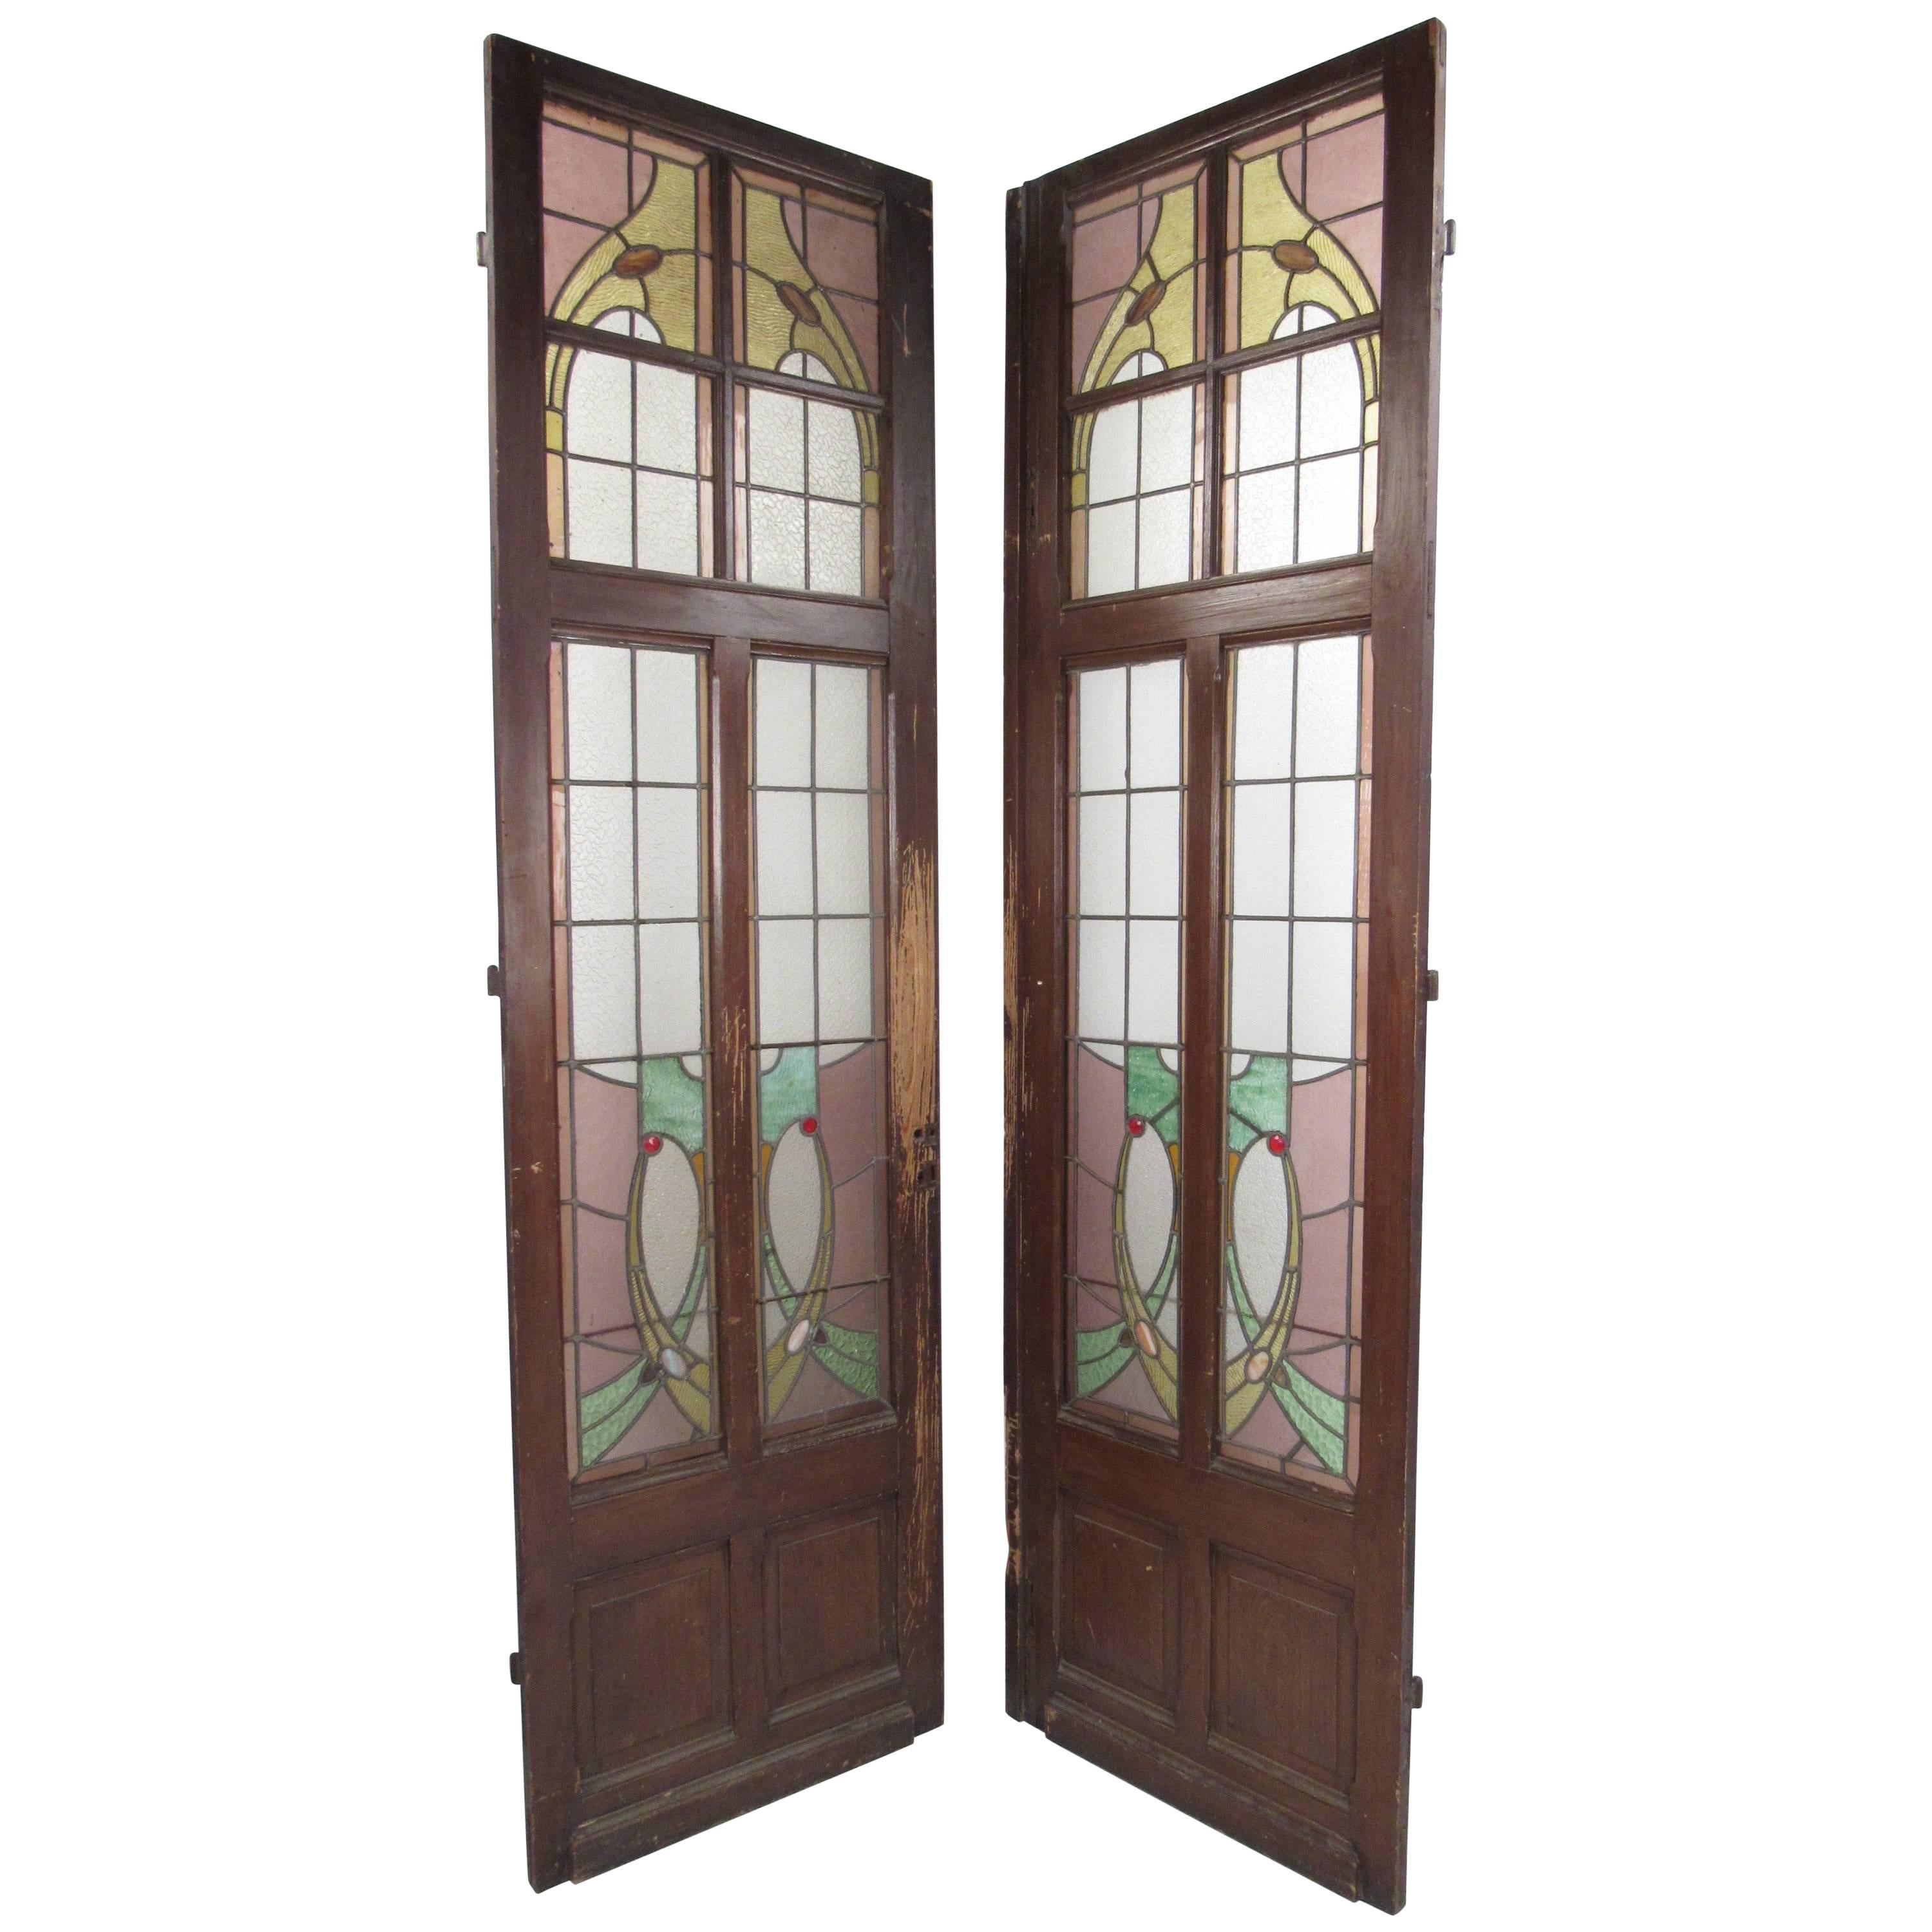 Pair of Vintage Stained Glass Doors